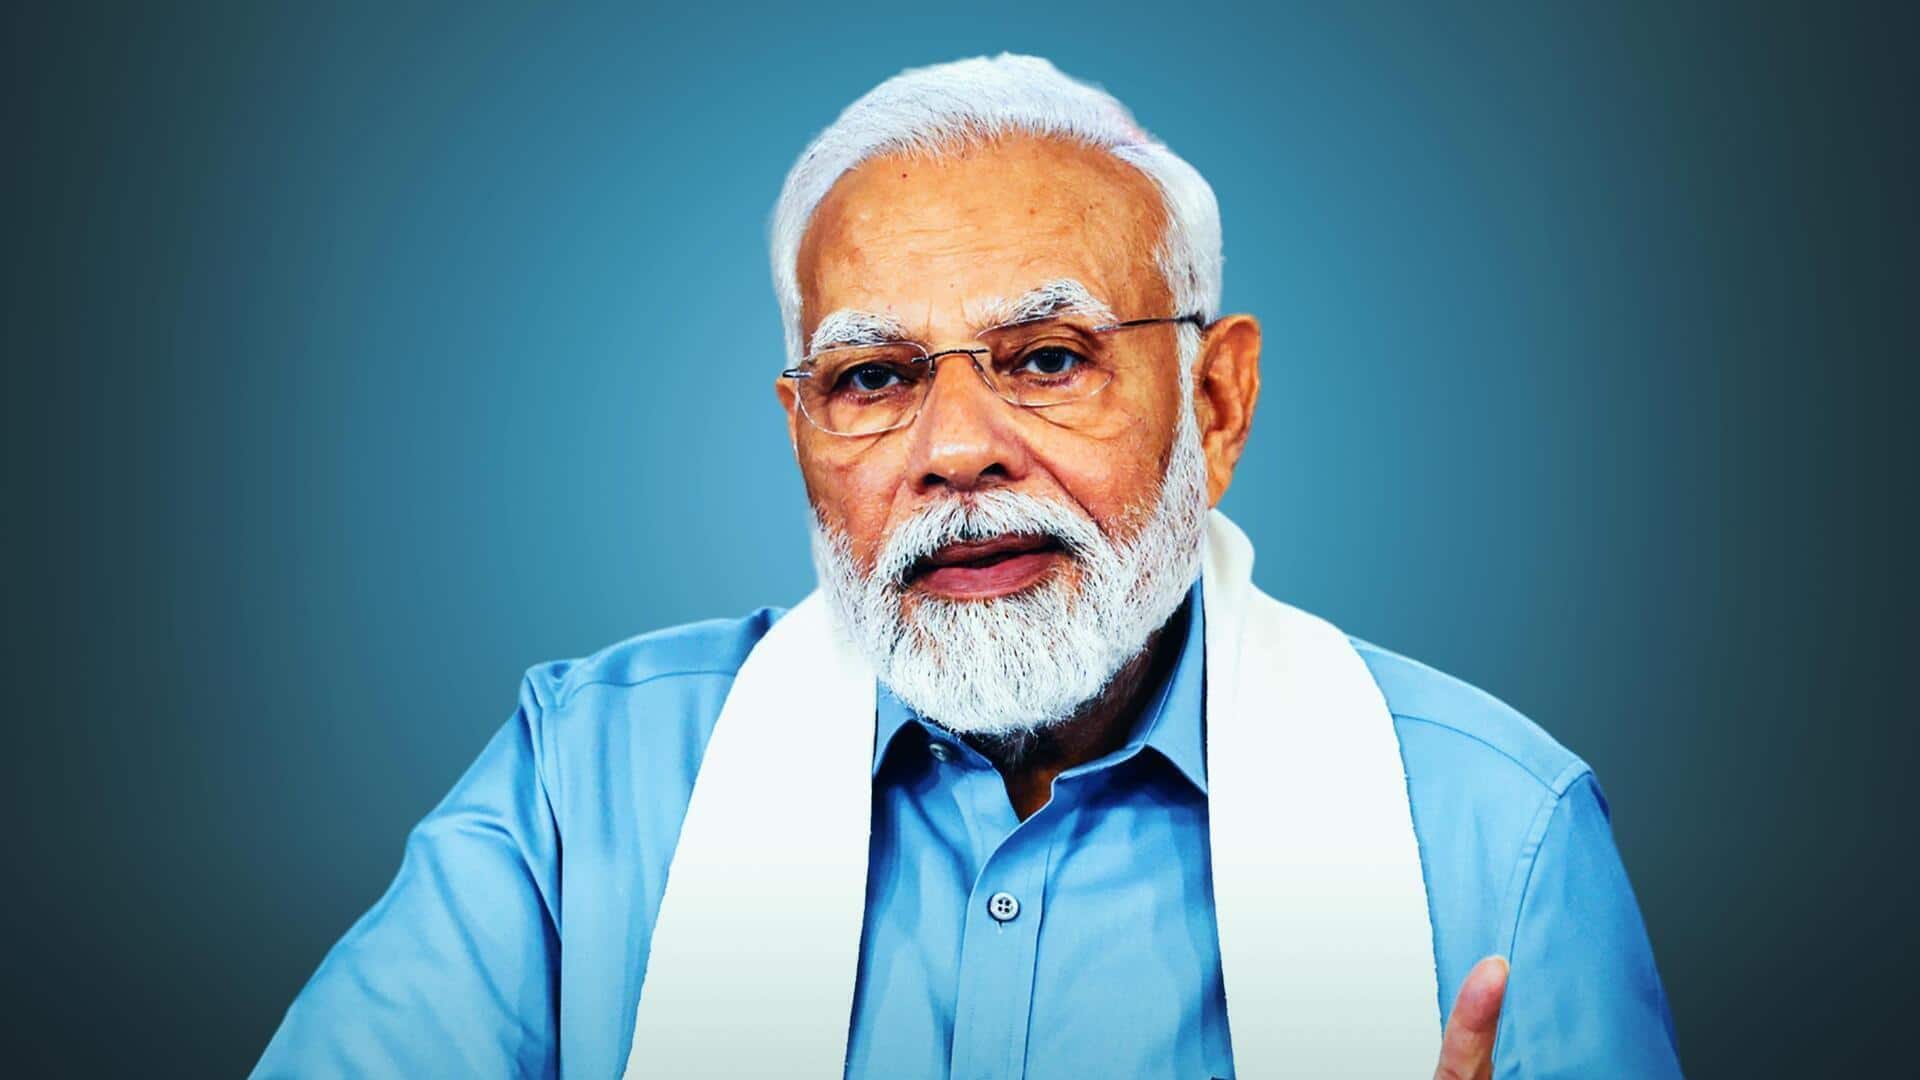 PM Modi to visit Qatar after Indian Navy veterans' release